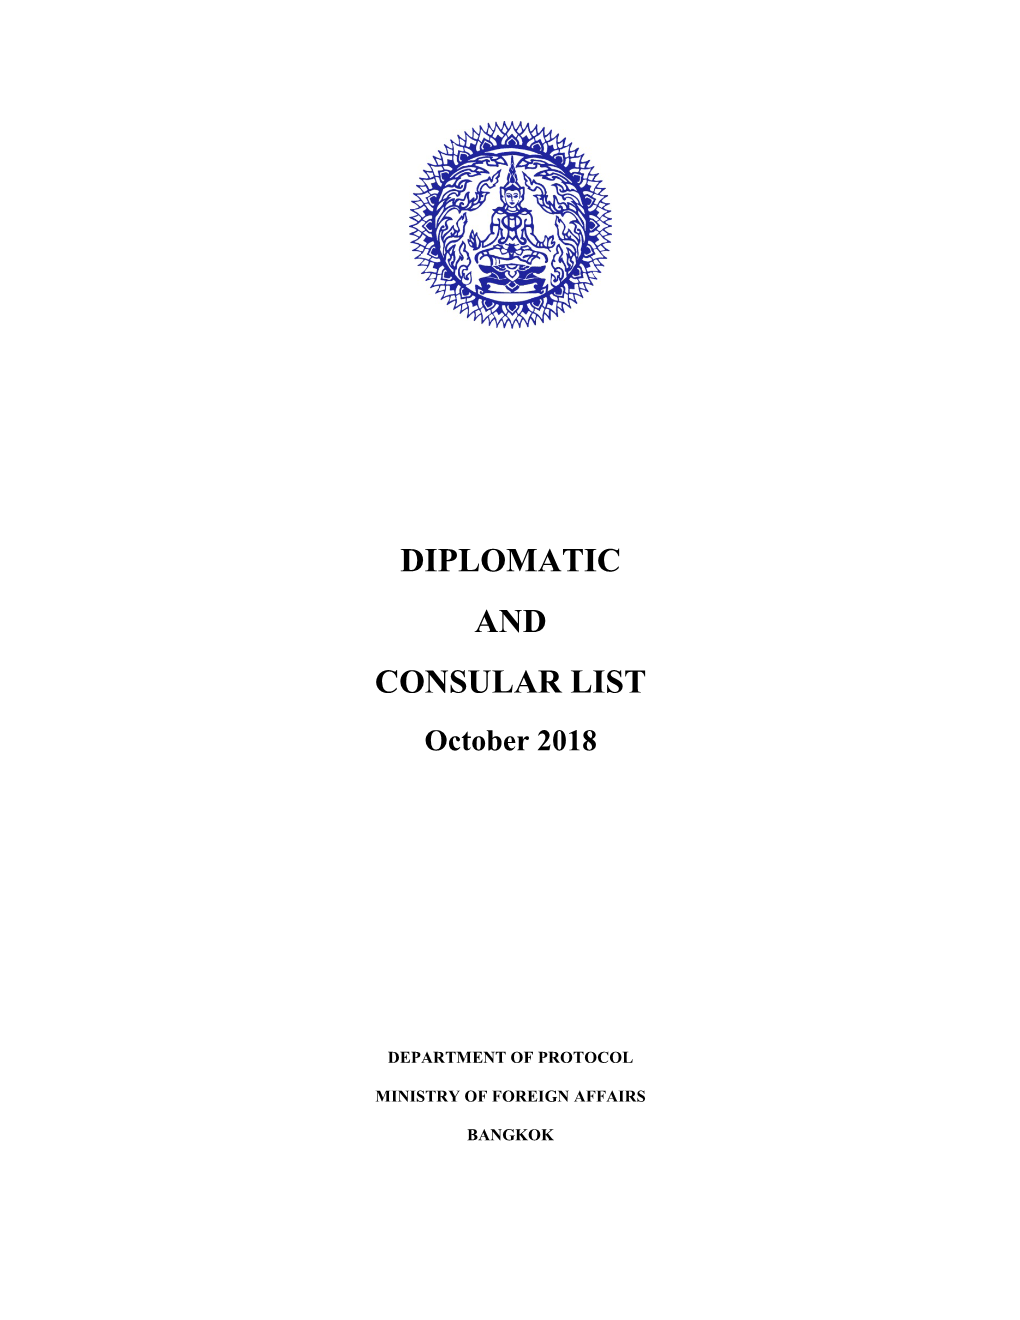 DIPLOMATIC and CONSULAR LIST October 2018